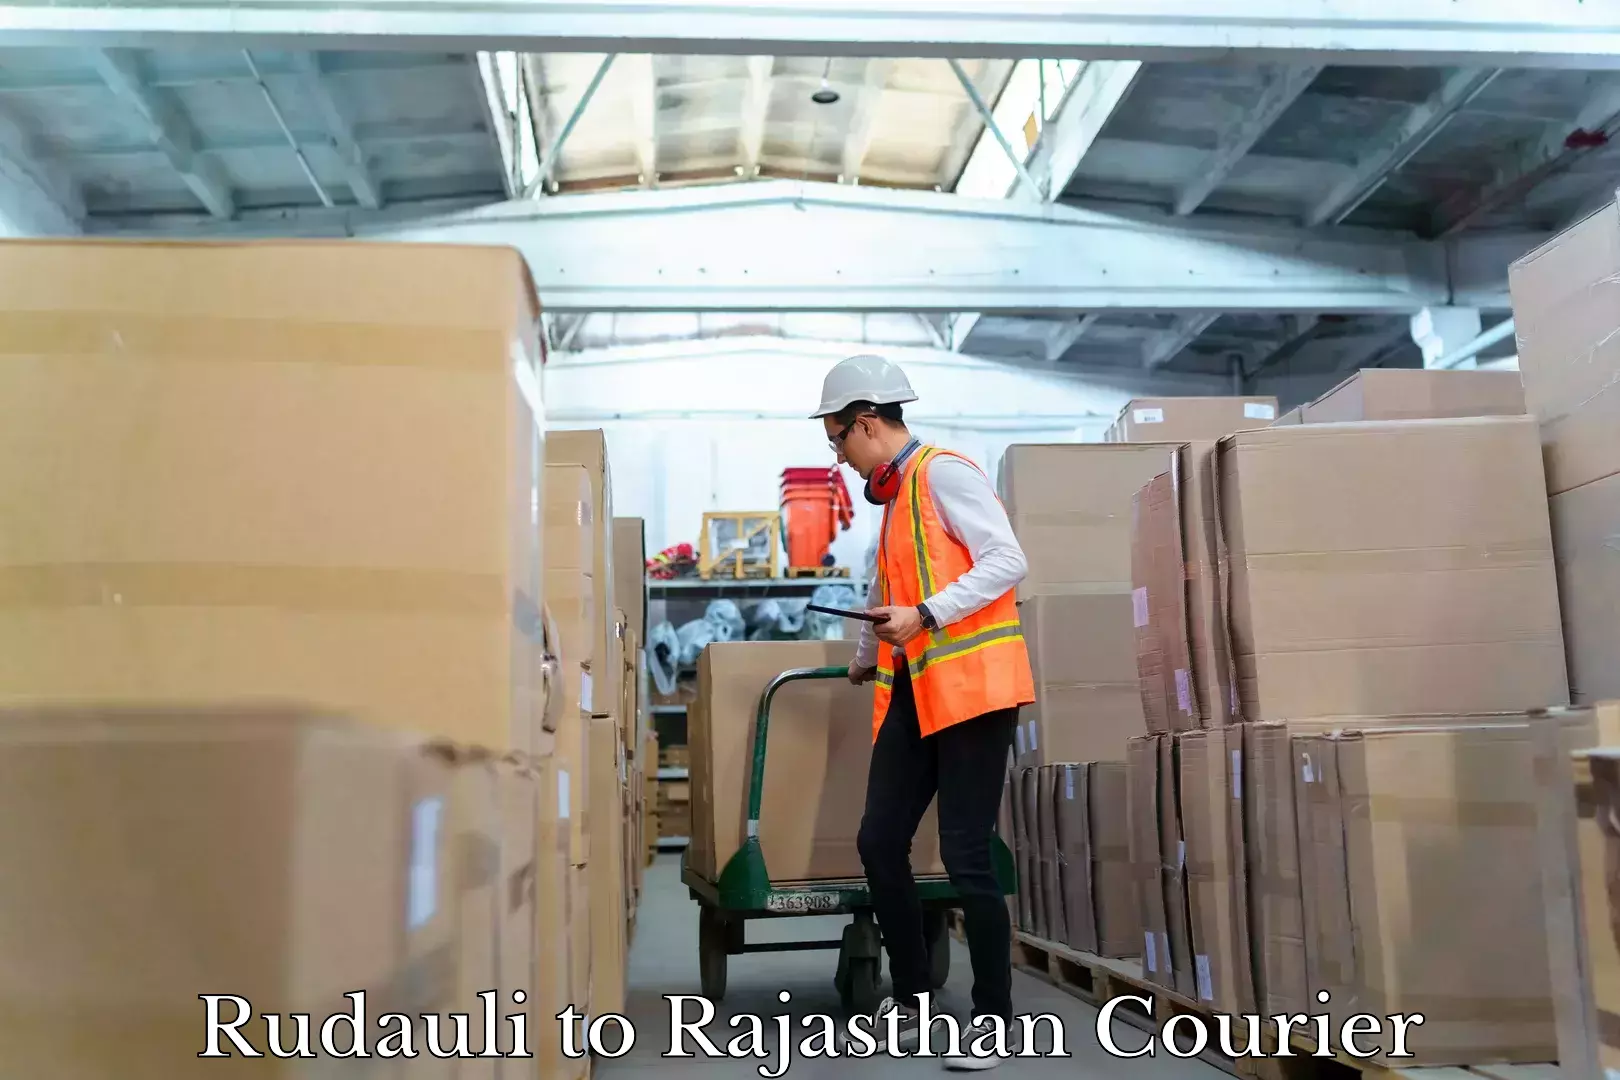 Subscription-based courier Rudauli to Rajasthan